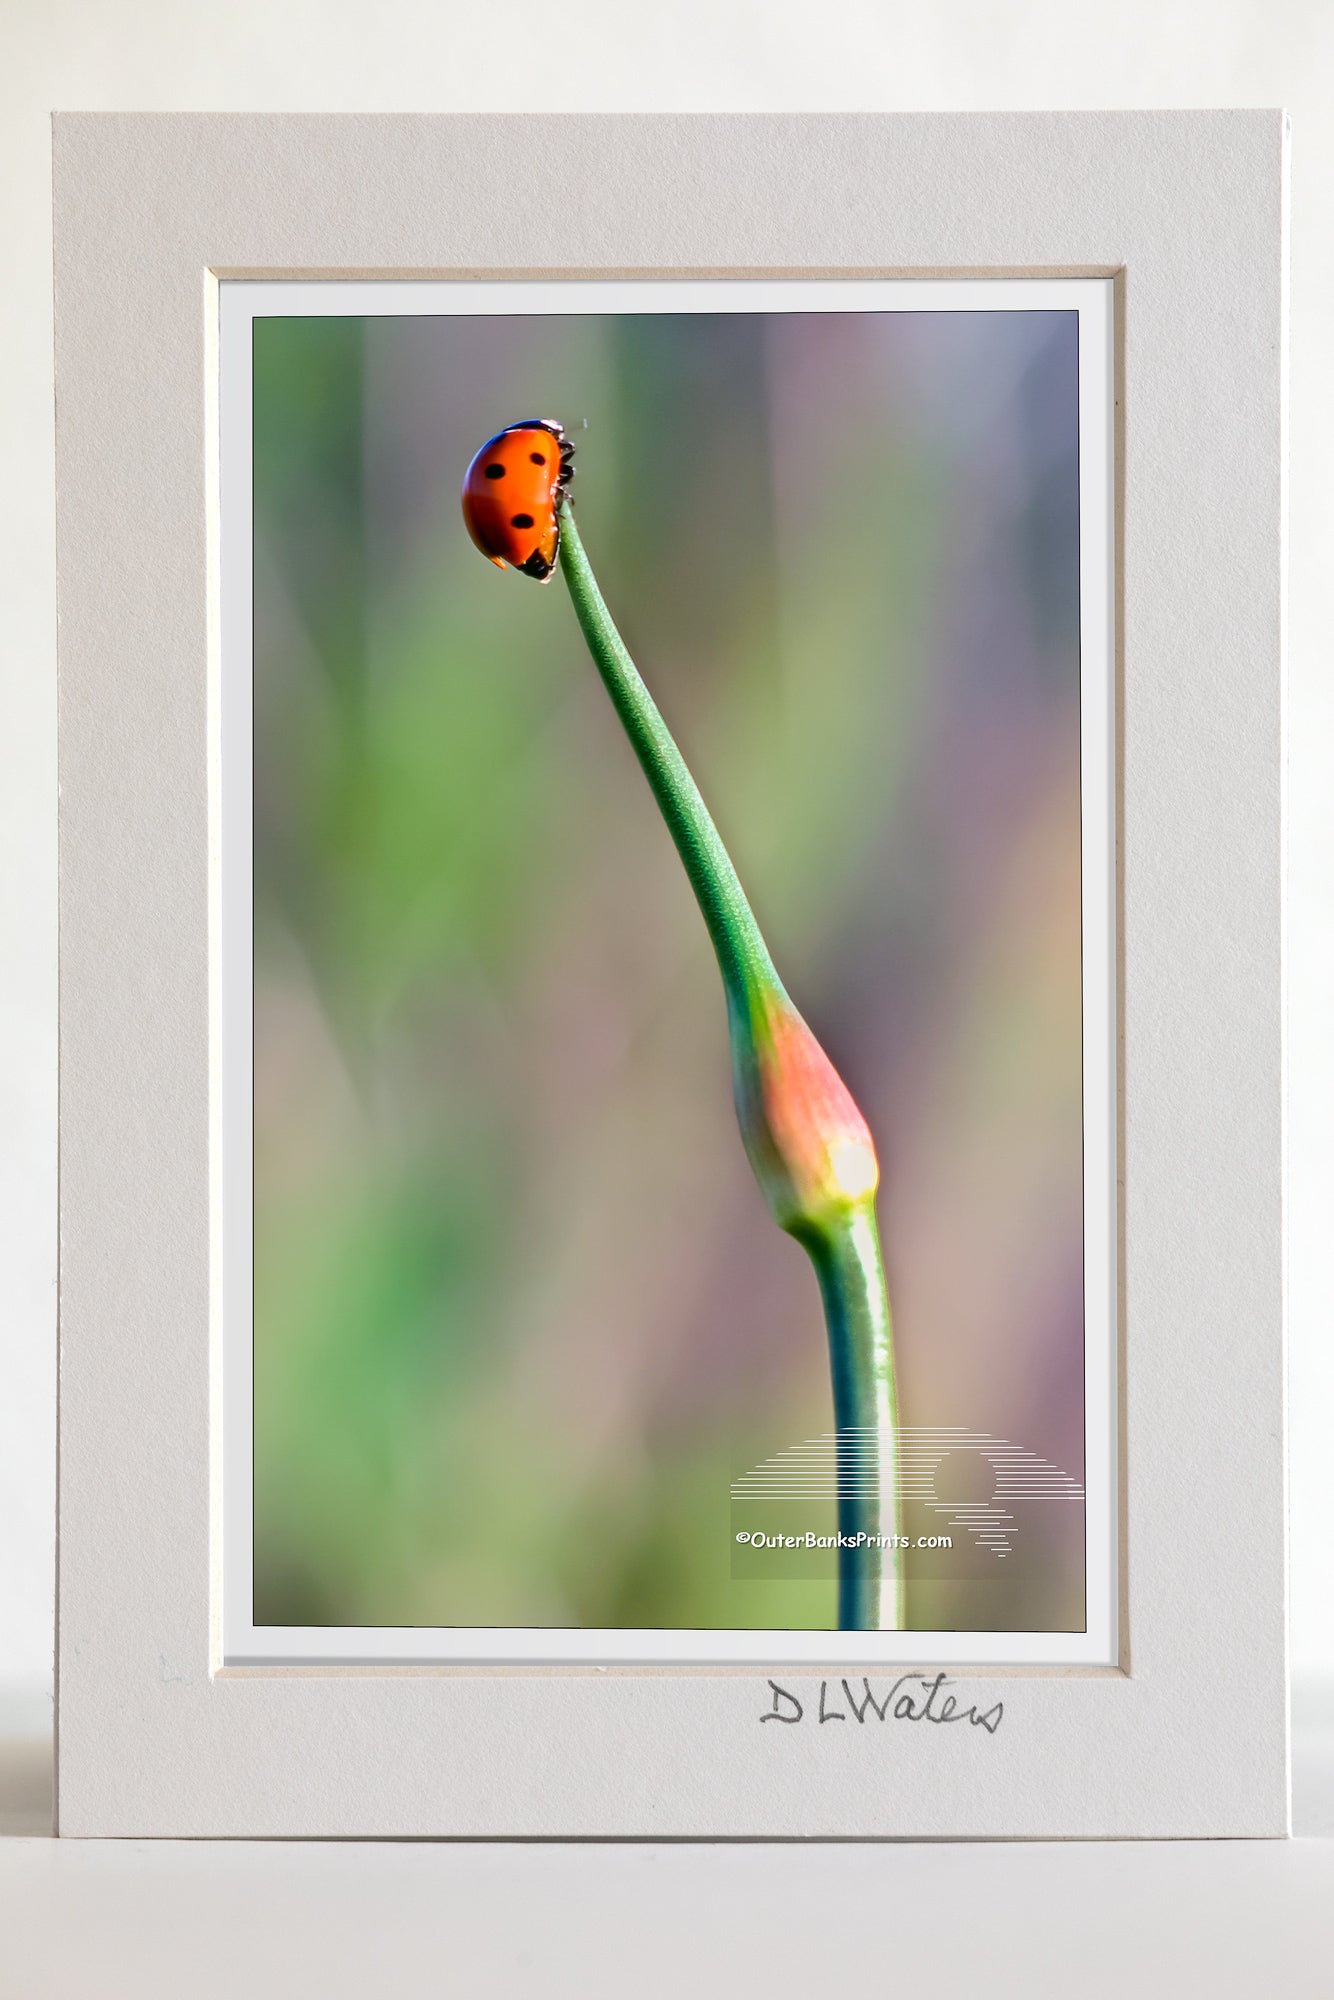 4 x 6 luster print in a 5 x 7 ivory mat of Ladybug climbed to the top of an onion stalk. Photograph just before it took flight.